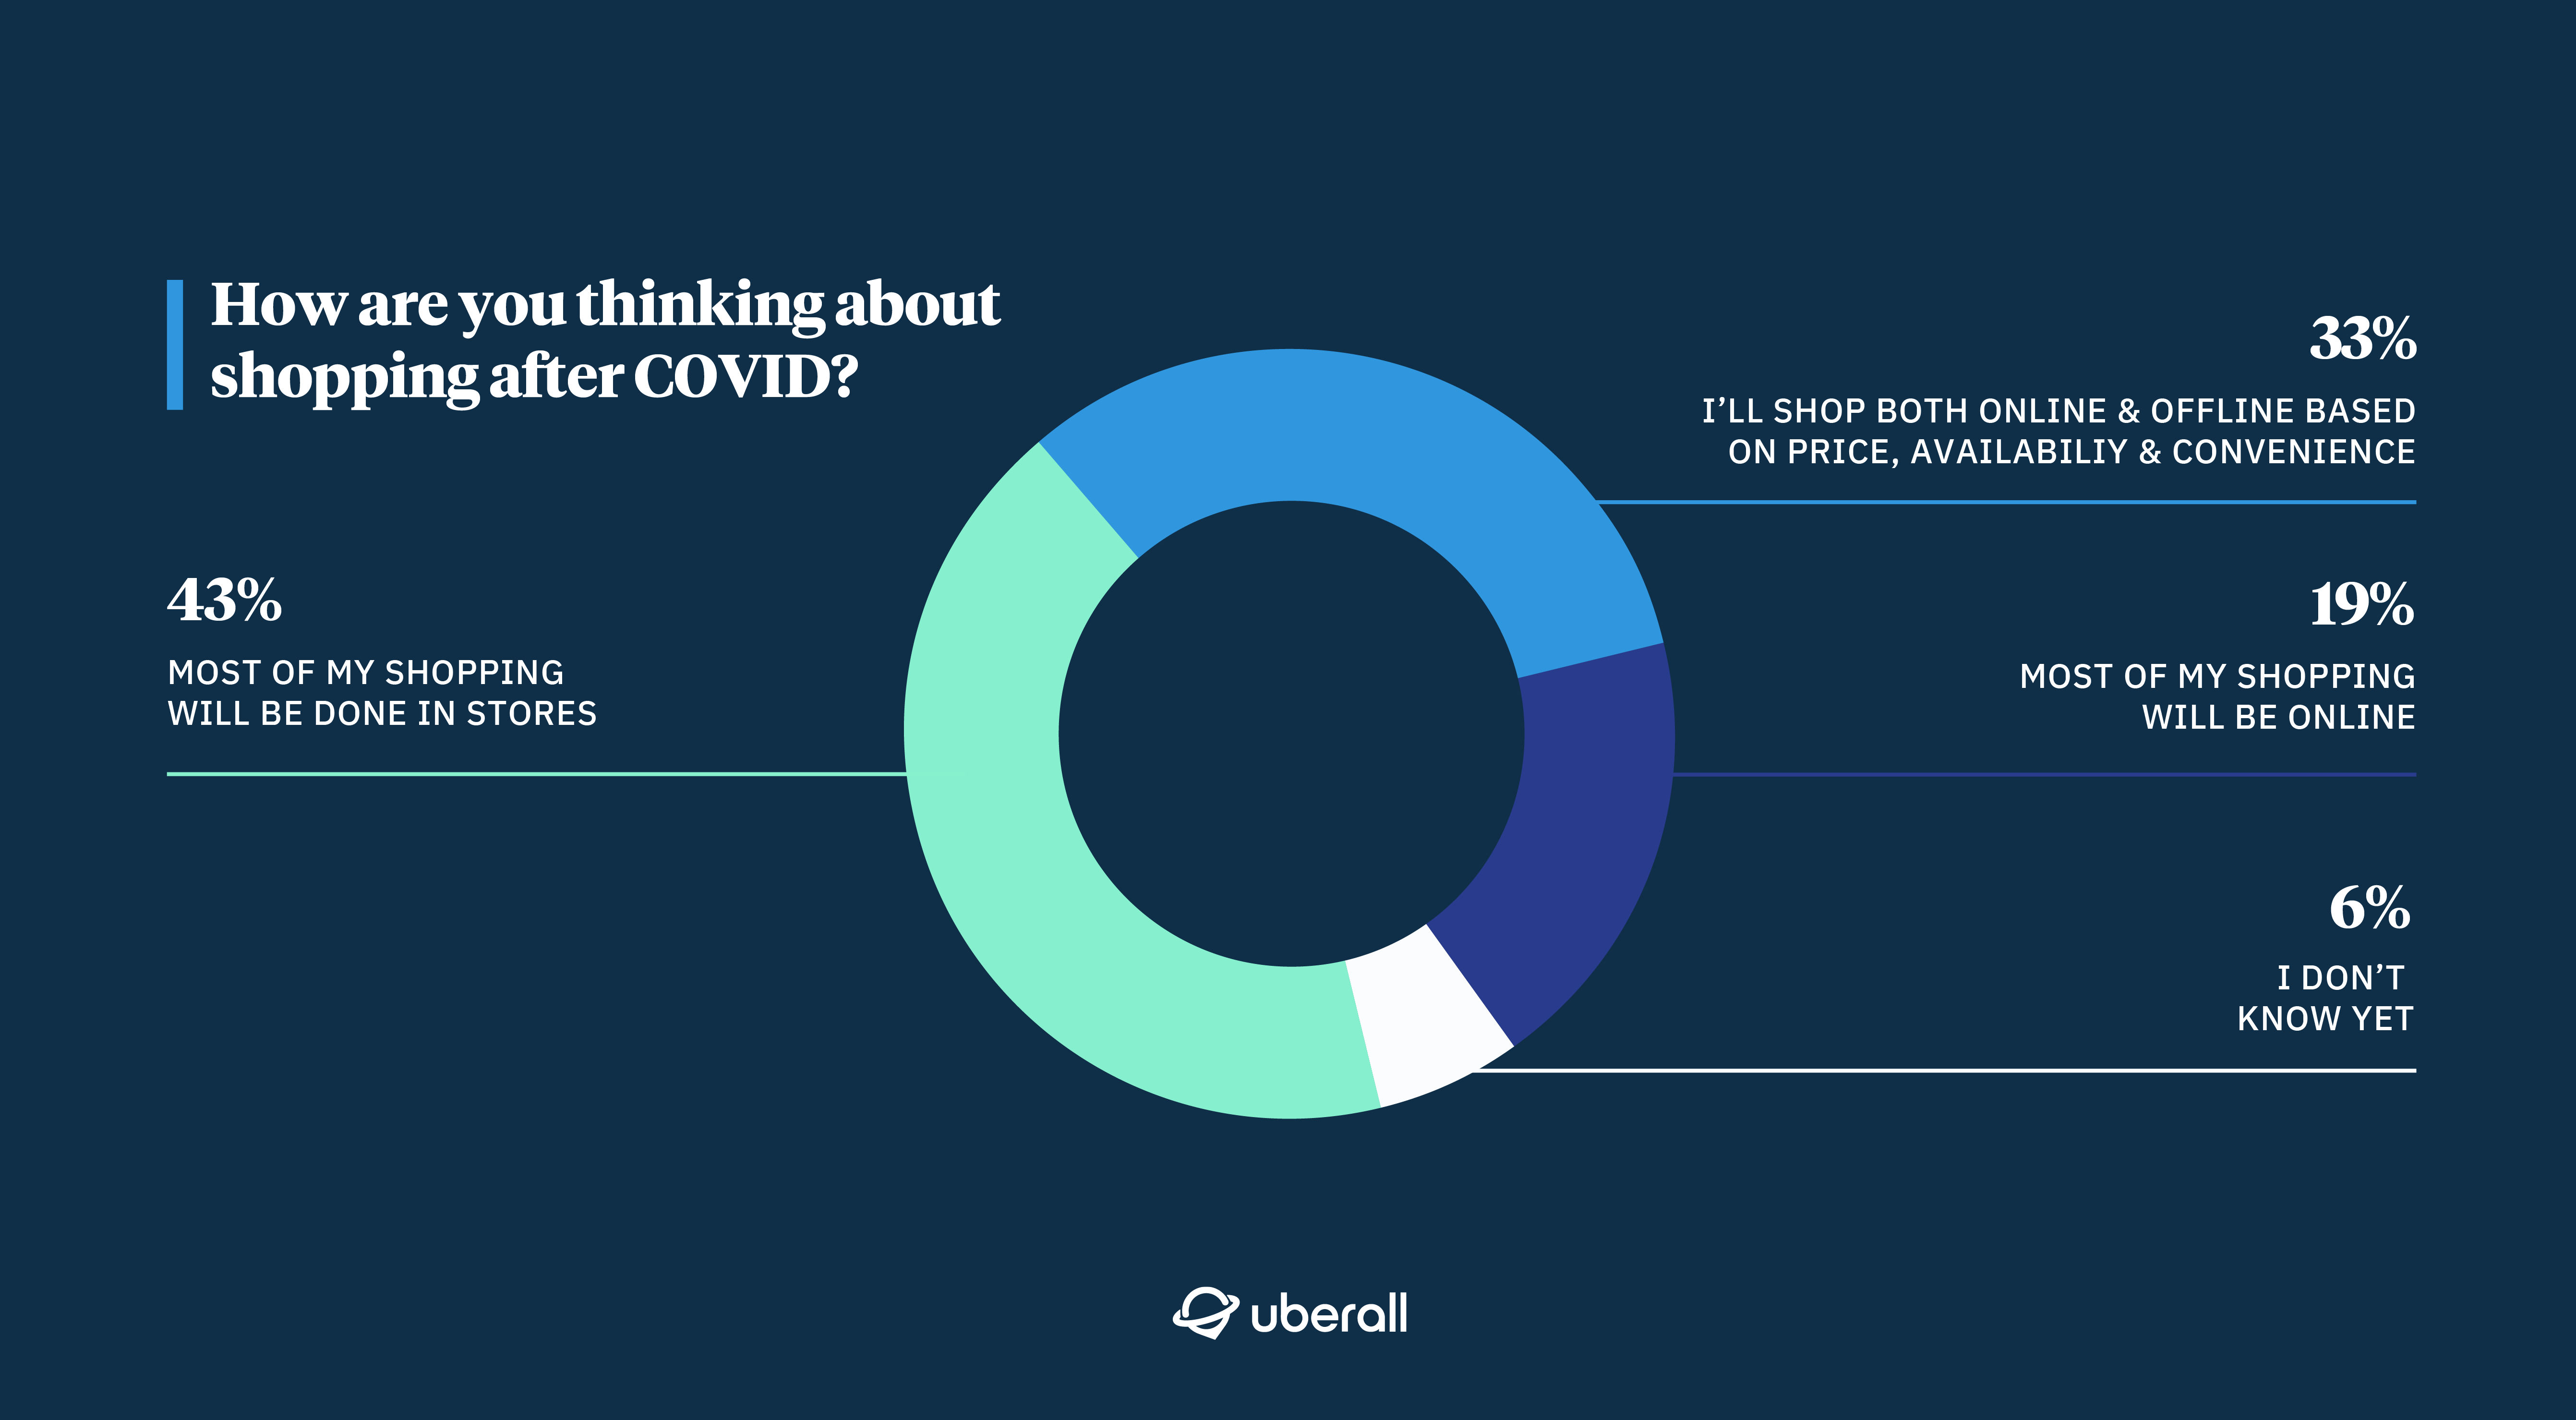 Consumer survey results on the question "How are you thinking about shopping after COVID?"